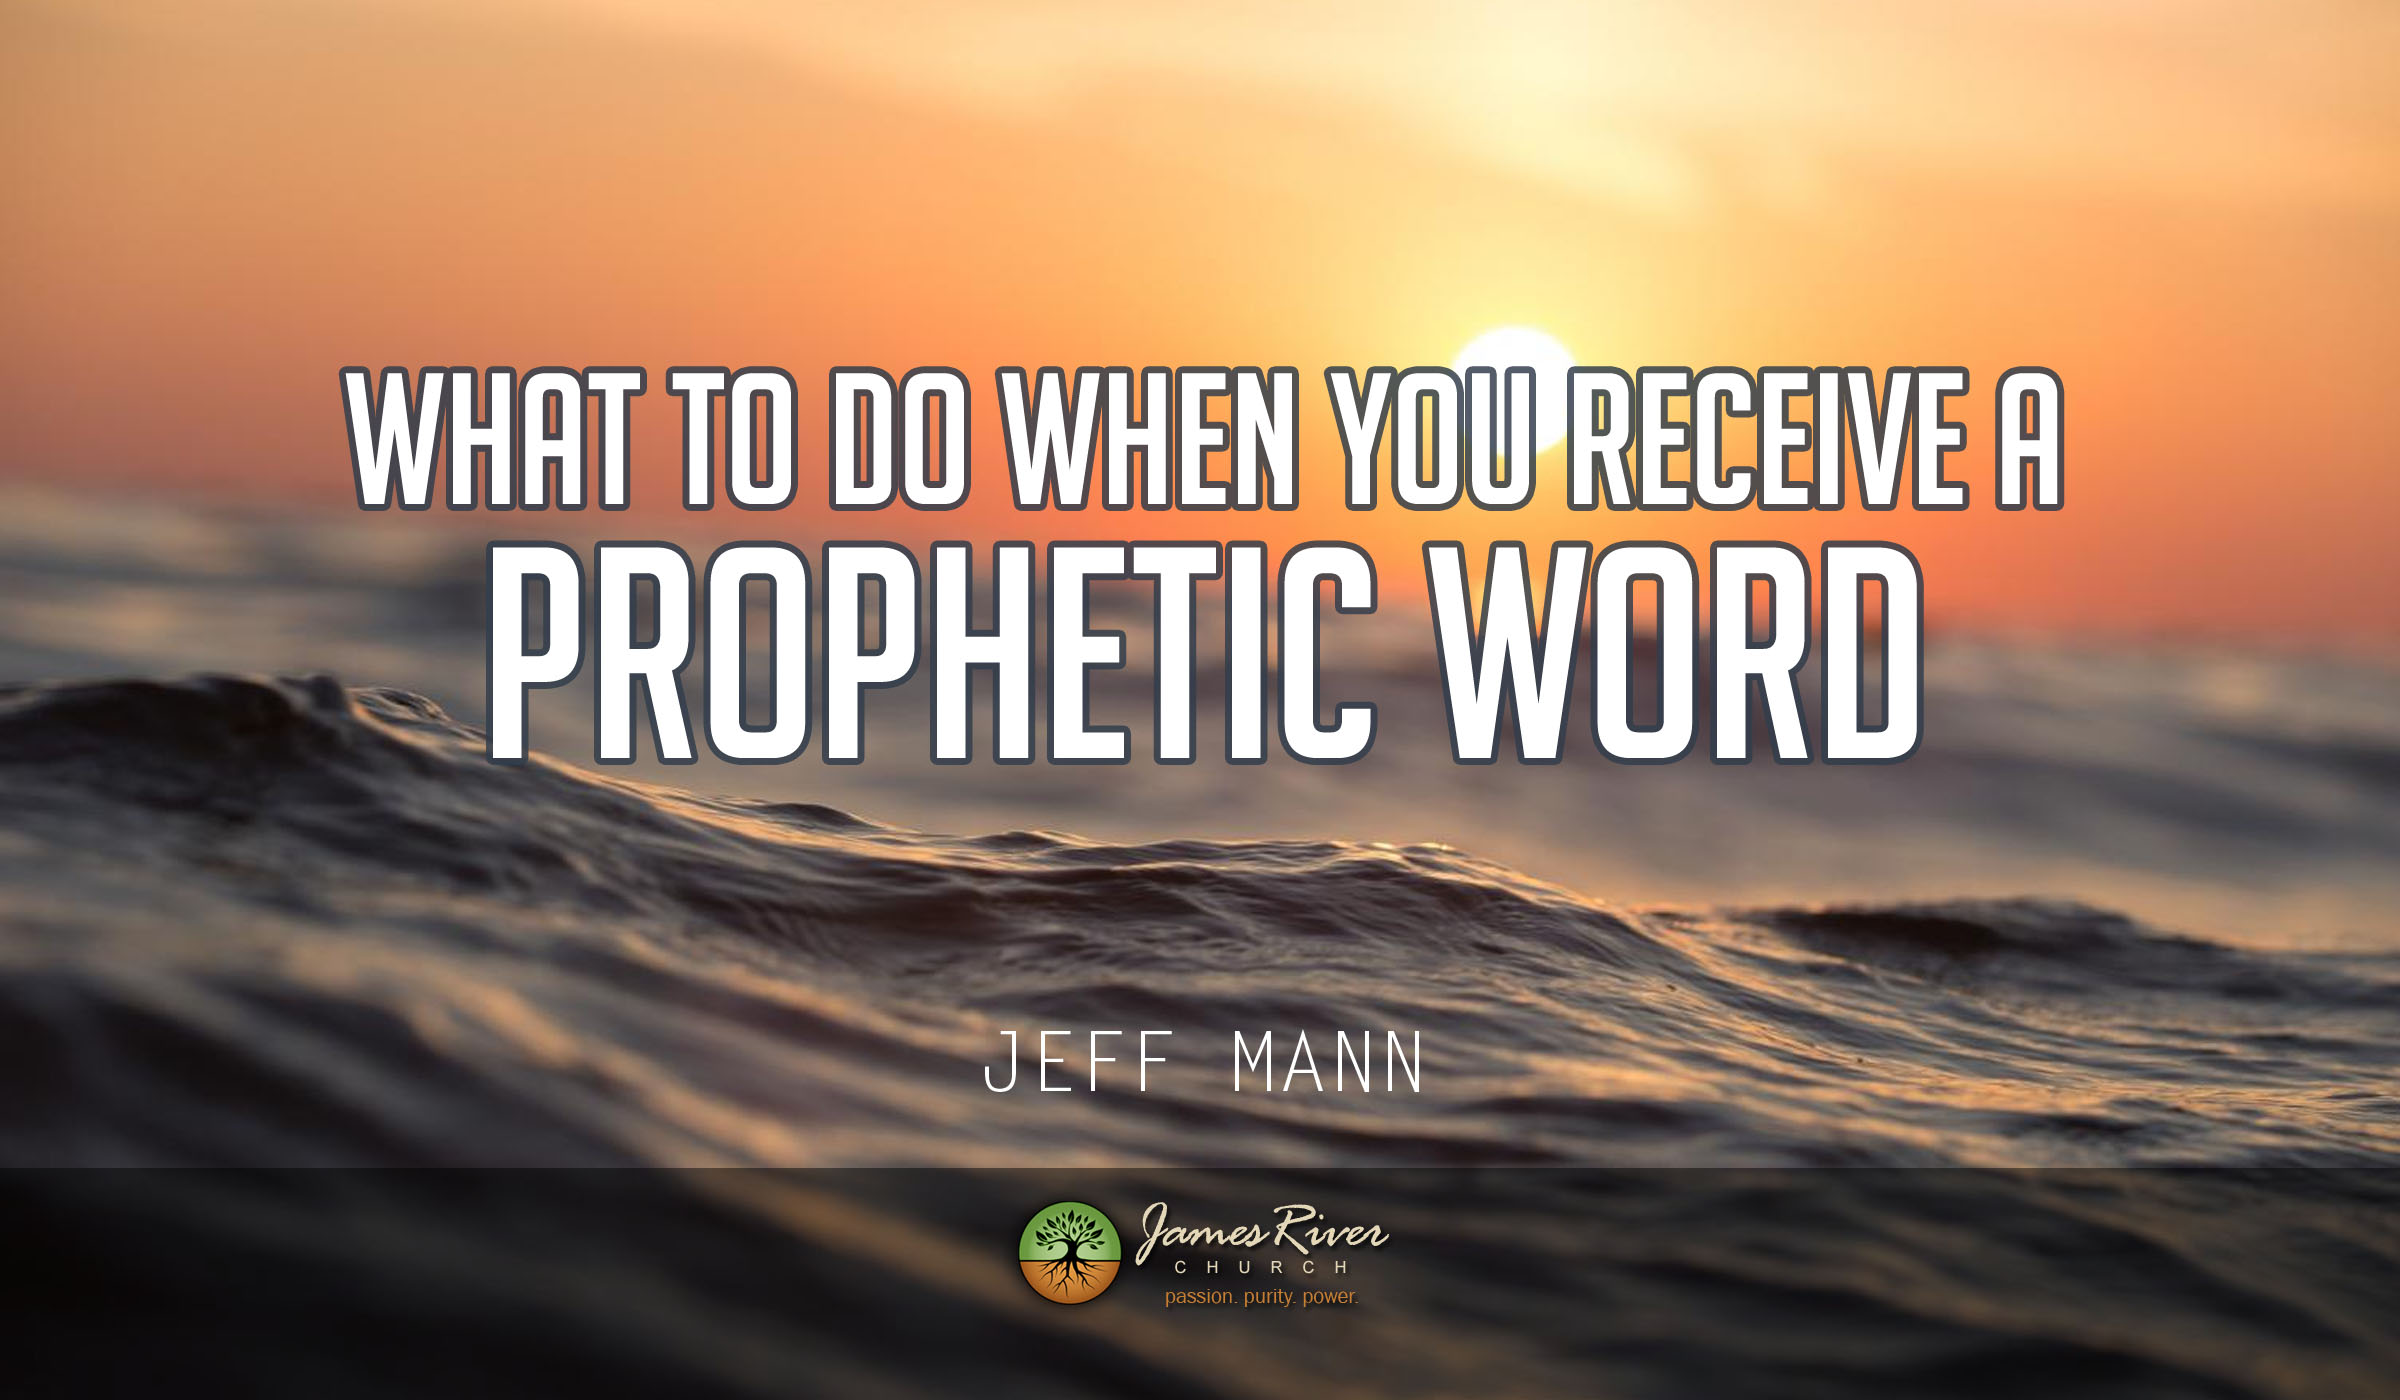 What To Do When You Receive a Prophetic Word